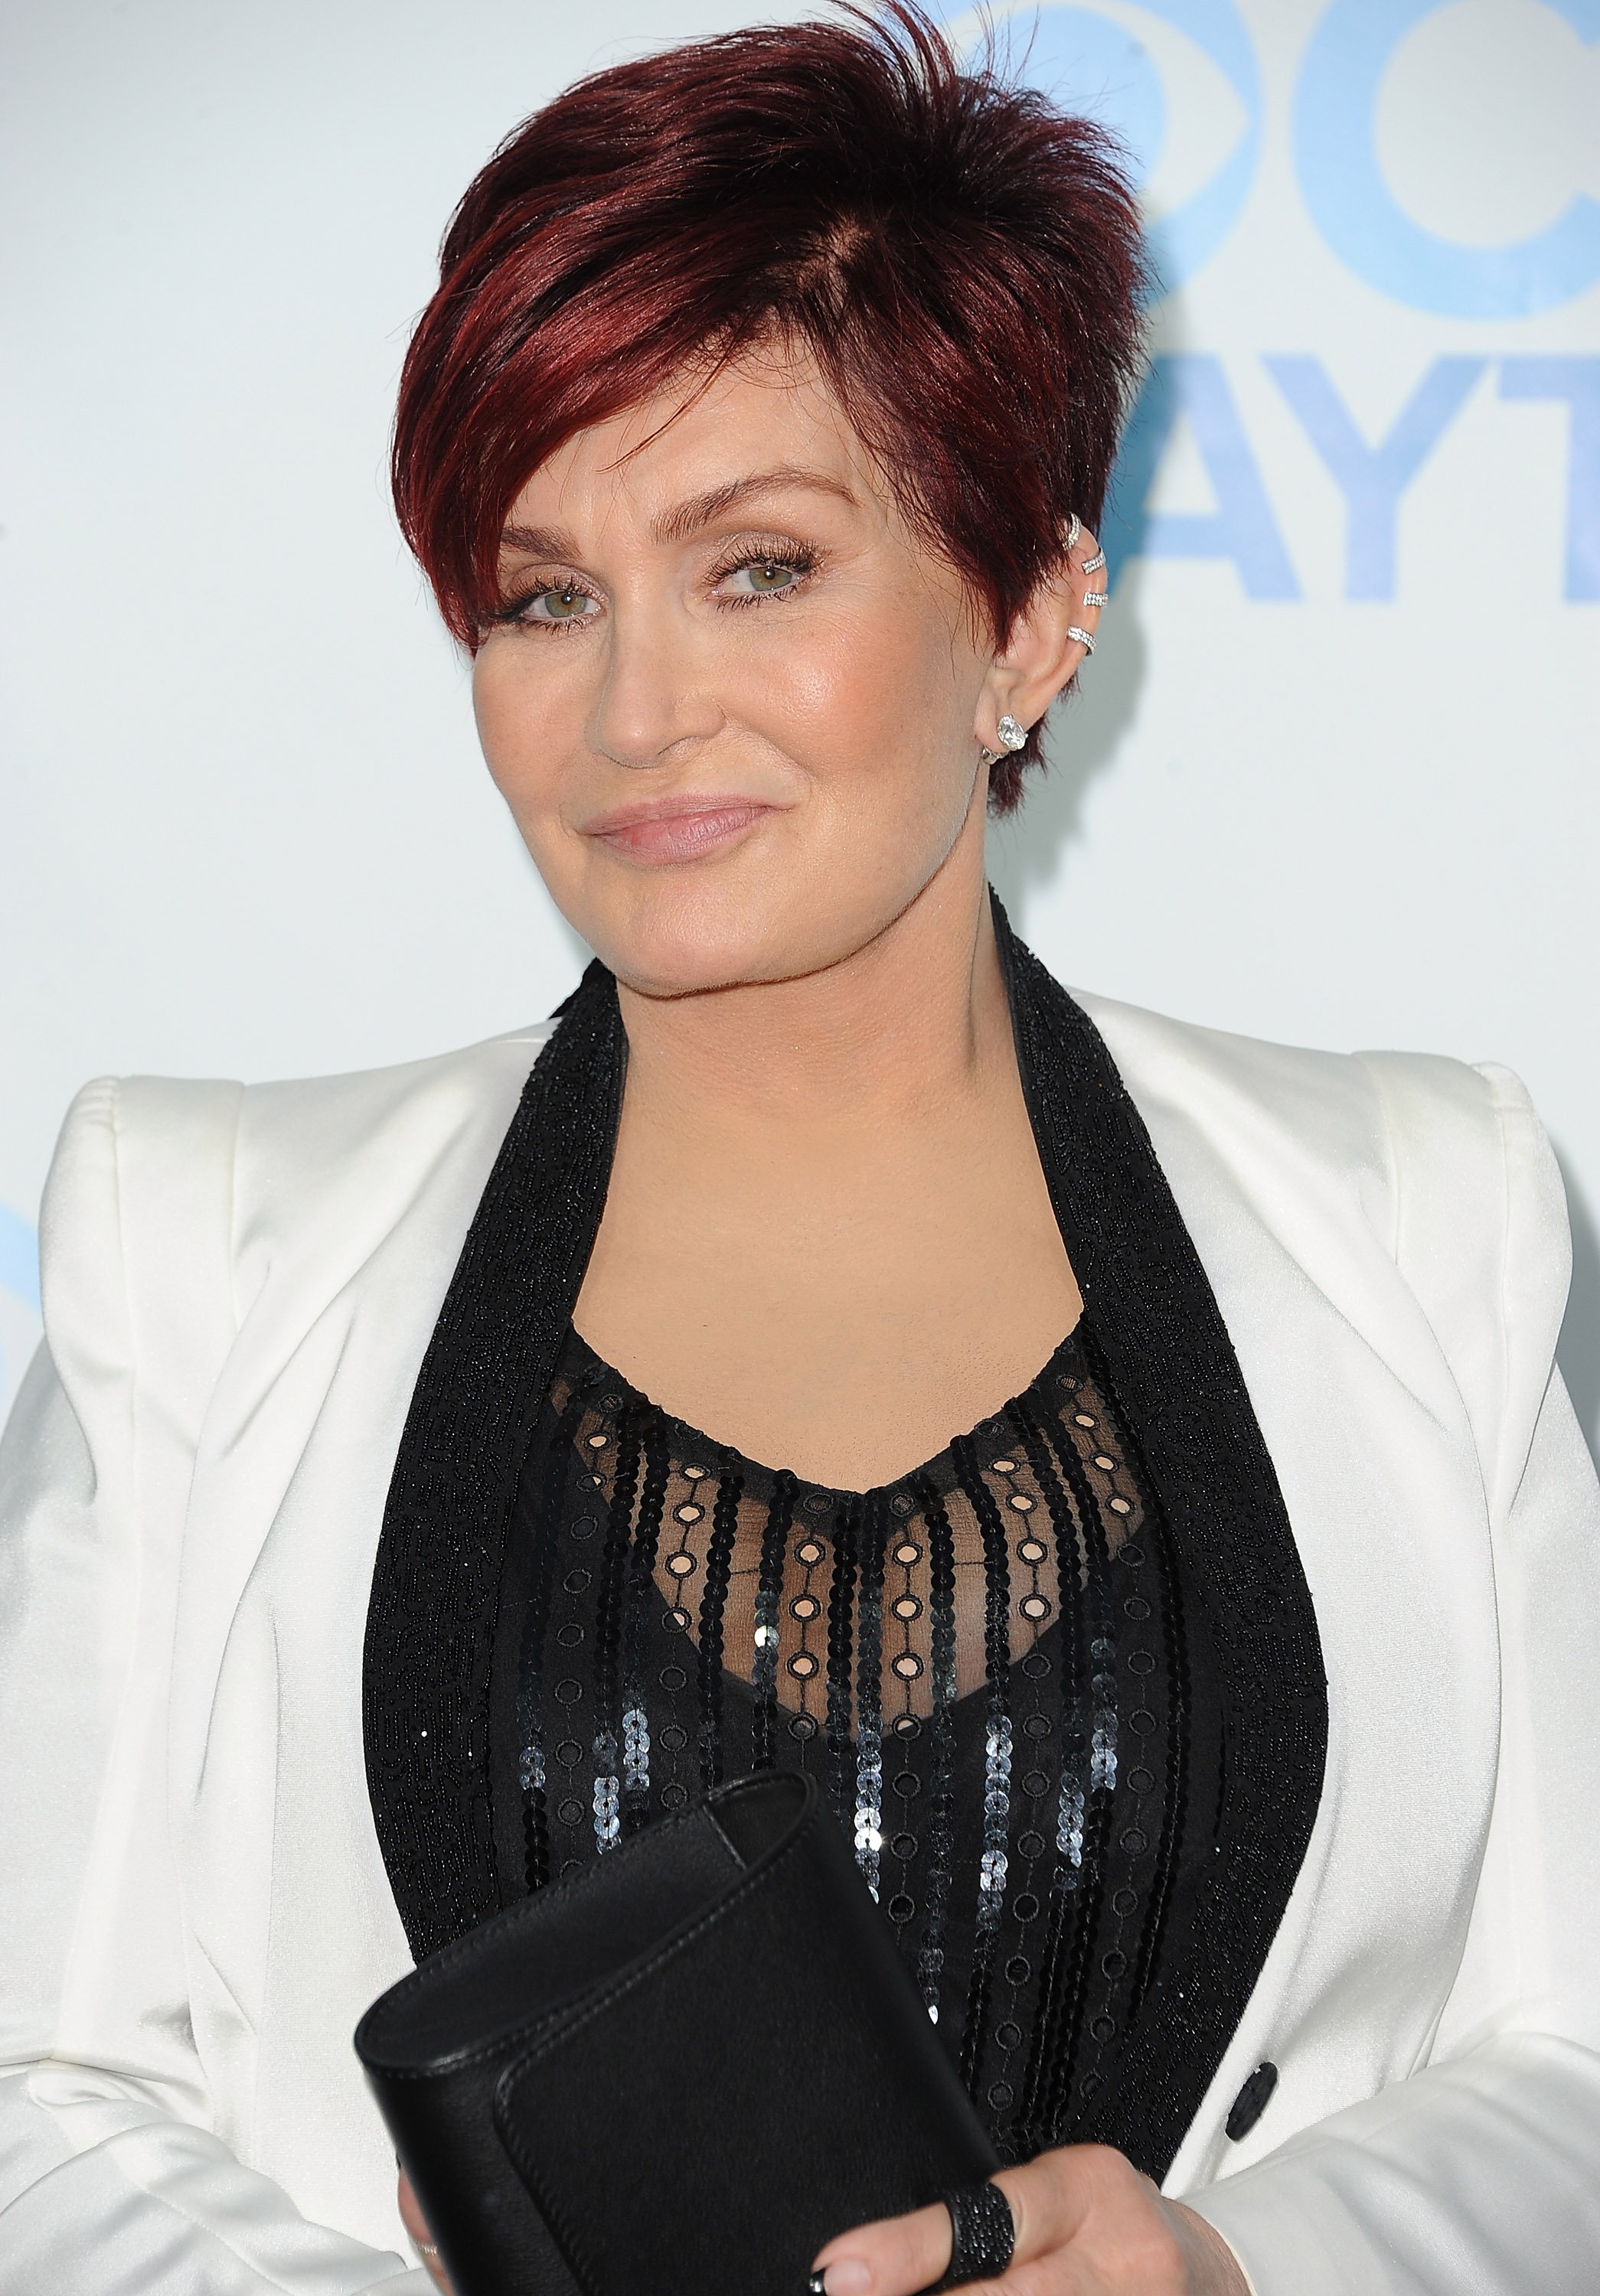 Sharon Osbourne pictured at the 41st Annual Daytime Emmy Awards CBS after party, 2014, California. | Photo: Getty Images